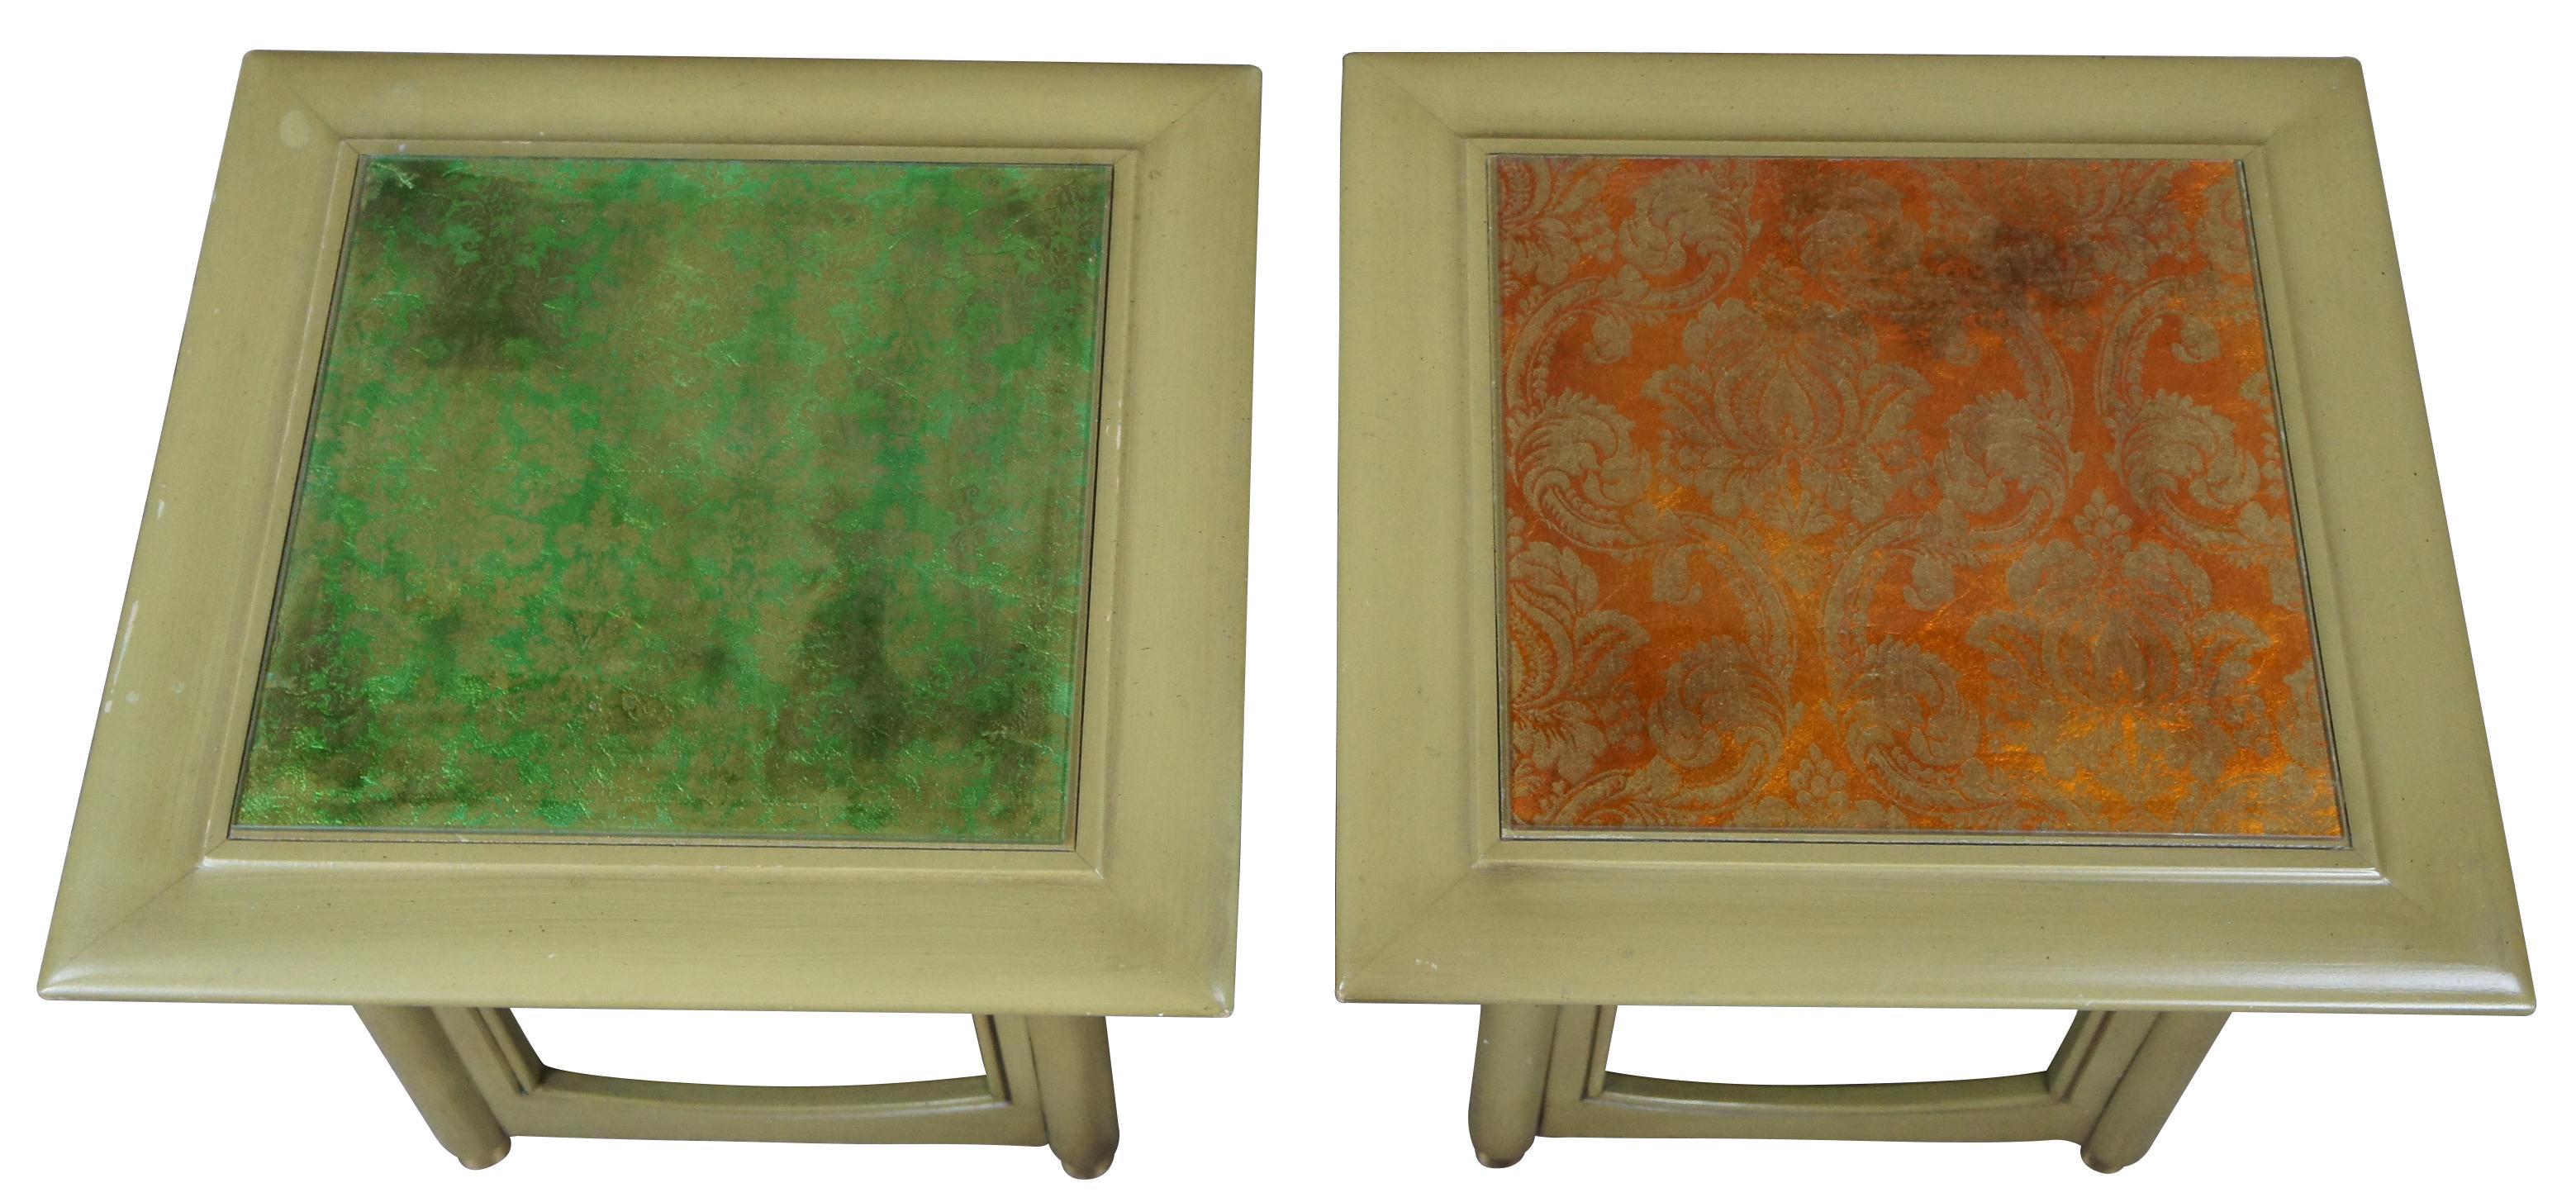 Pair of Hekman square accent tables. Made from wood with a distressed green finish. Features an open frame base with beveled glass tops. Each top is set over a french brocade. One is orange and the other is green